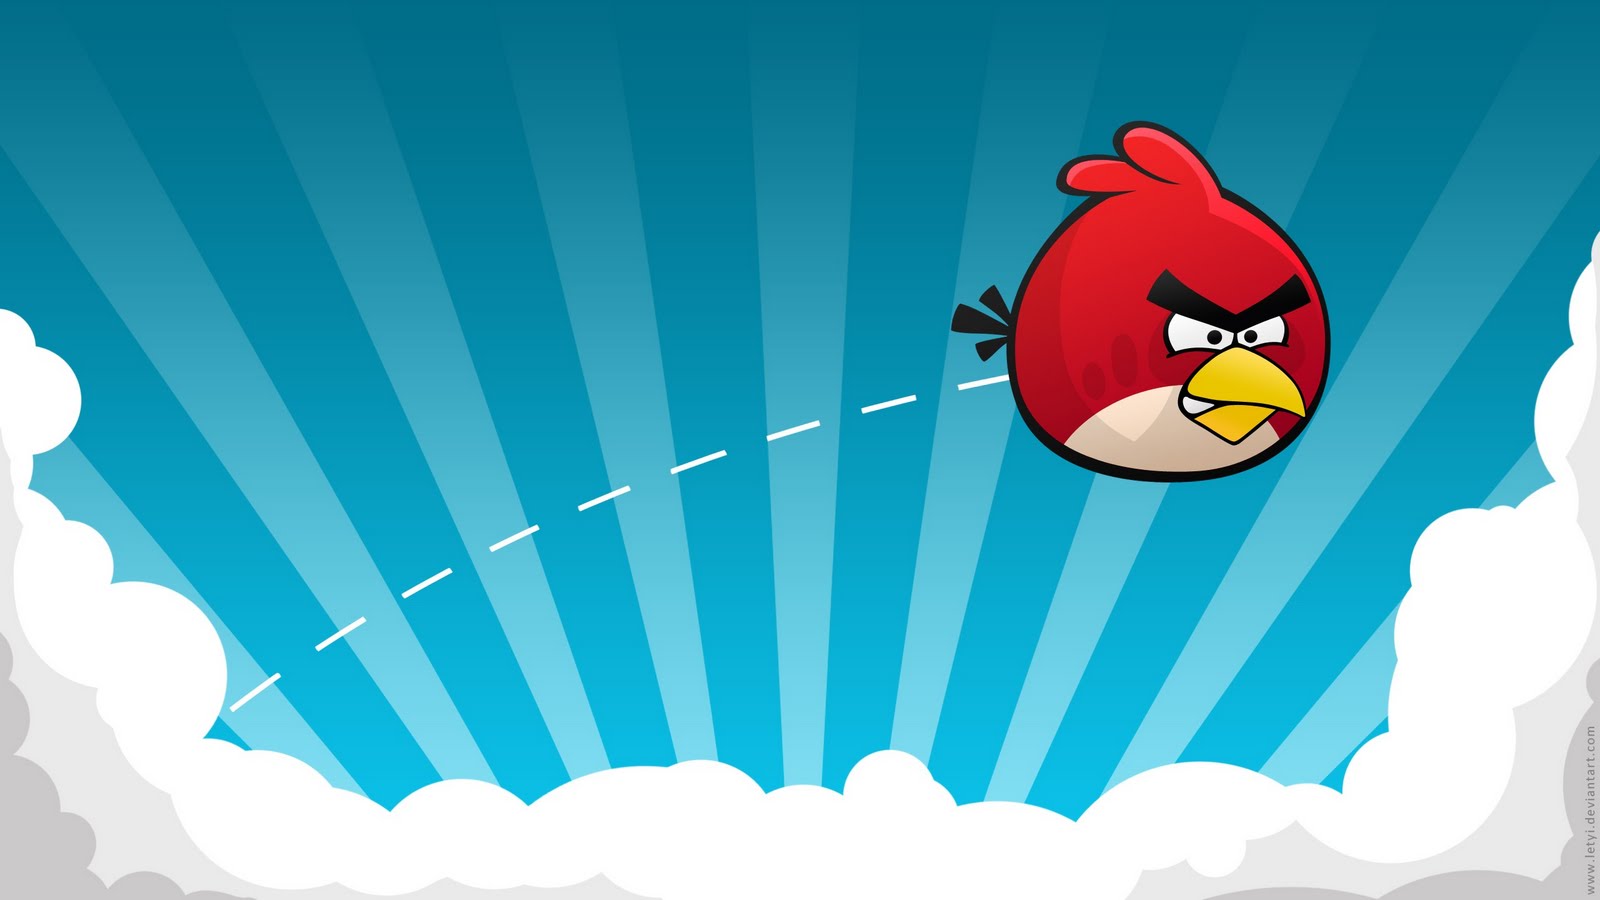 Angry birds - Angry Birds Wallpaper 36543022 - Fanpop